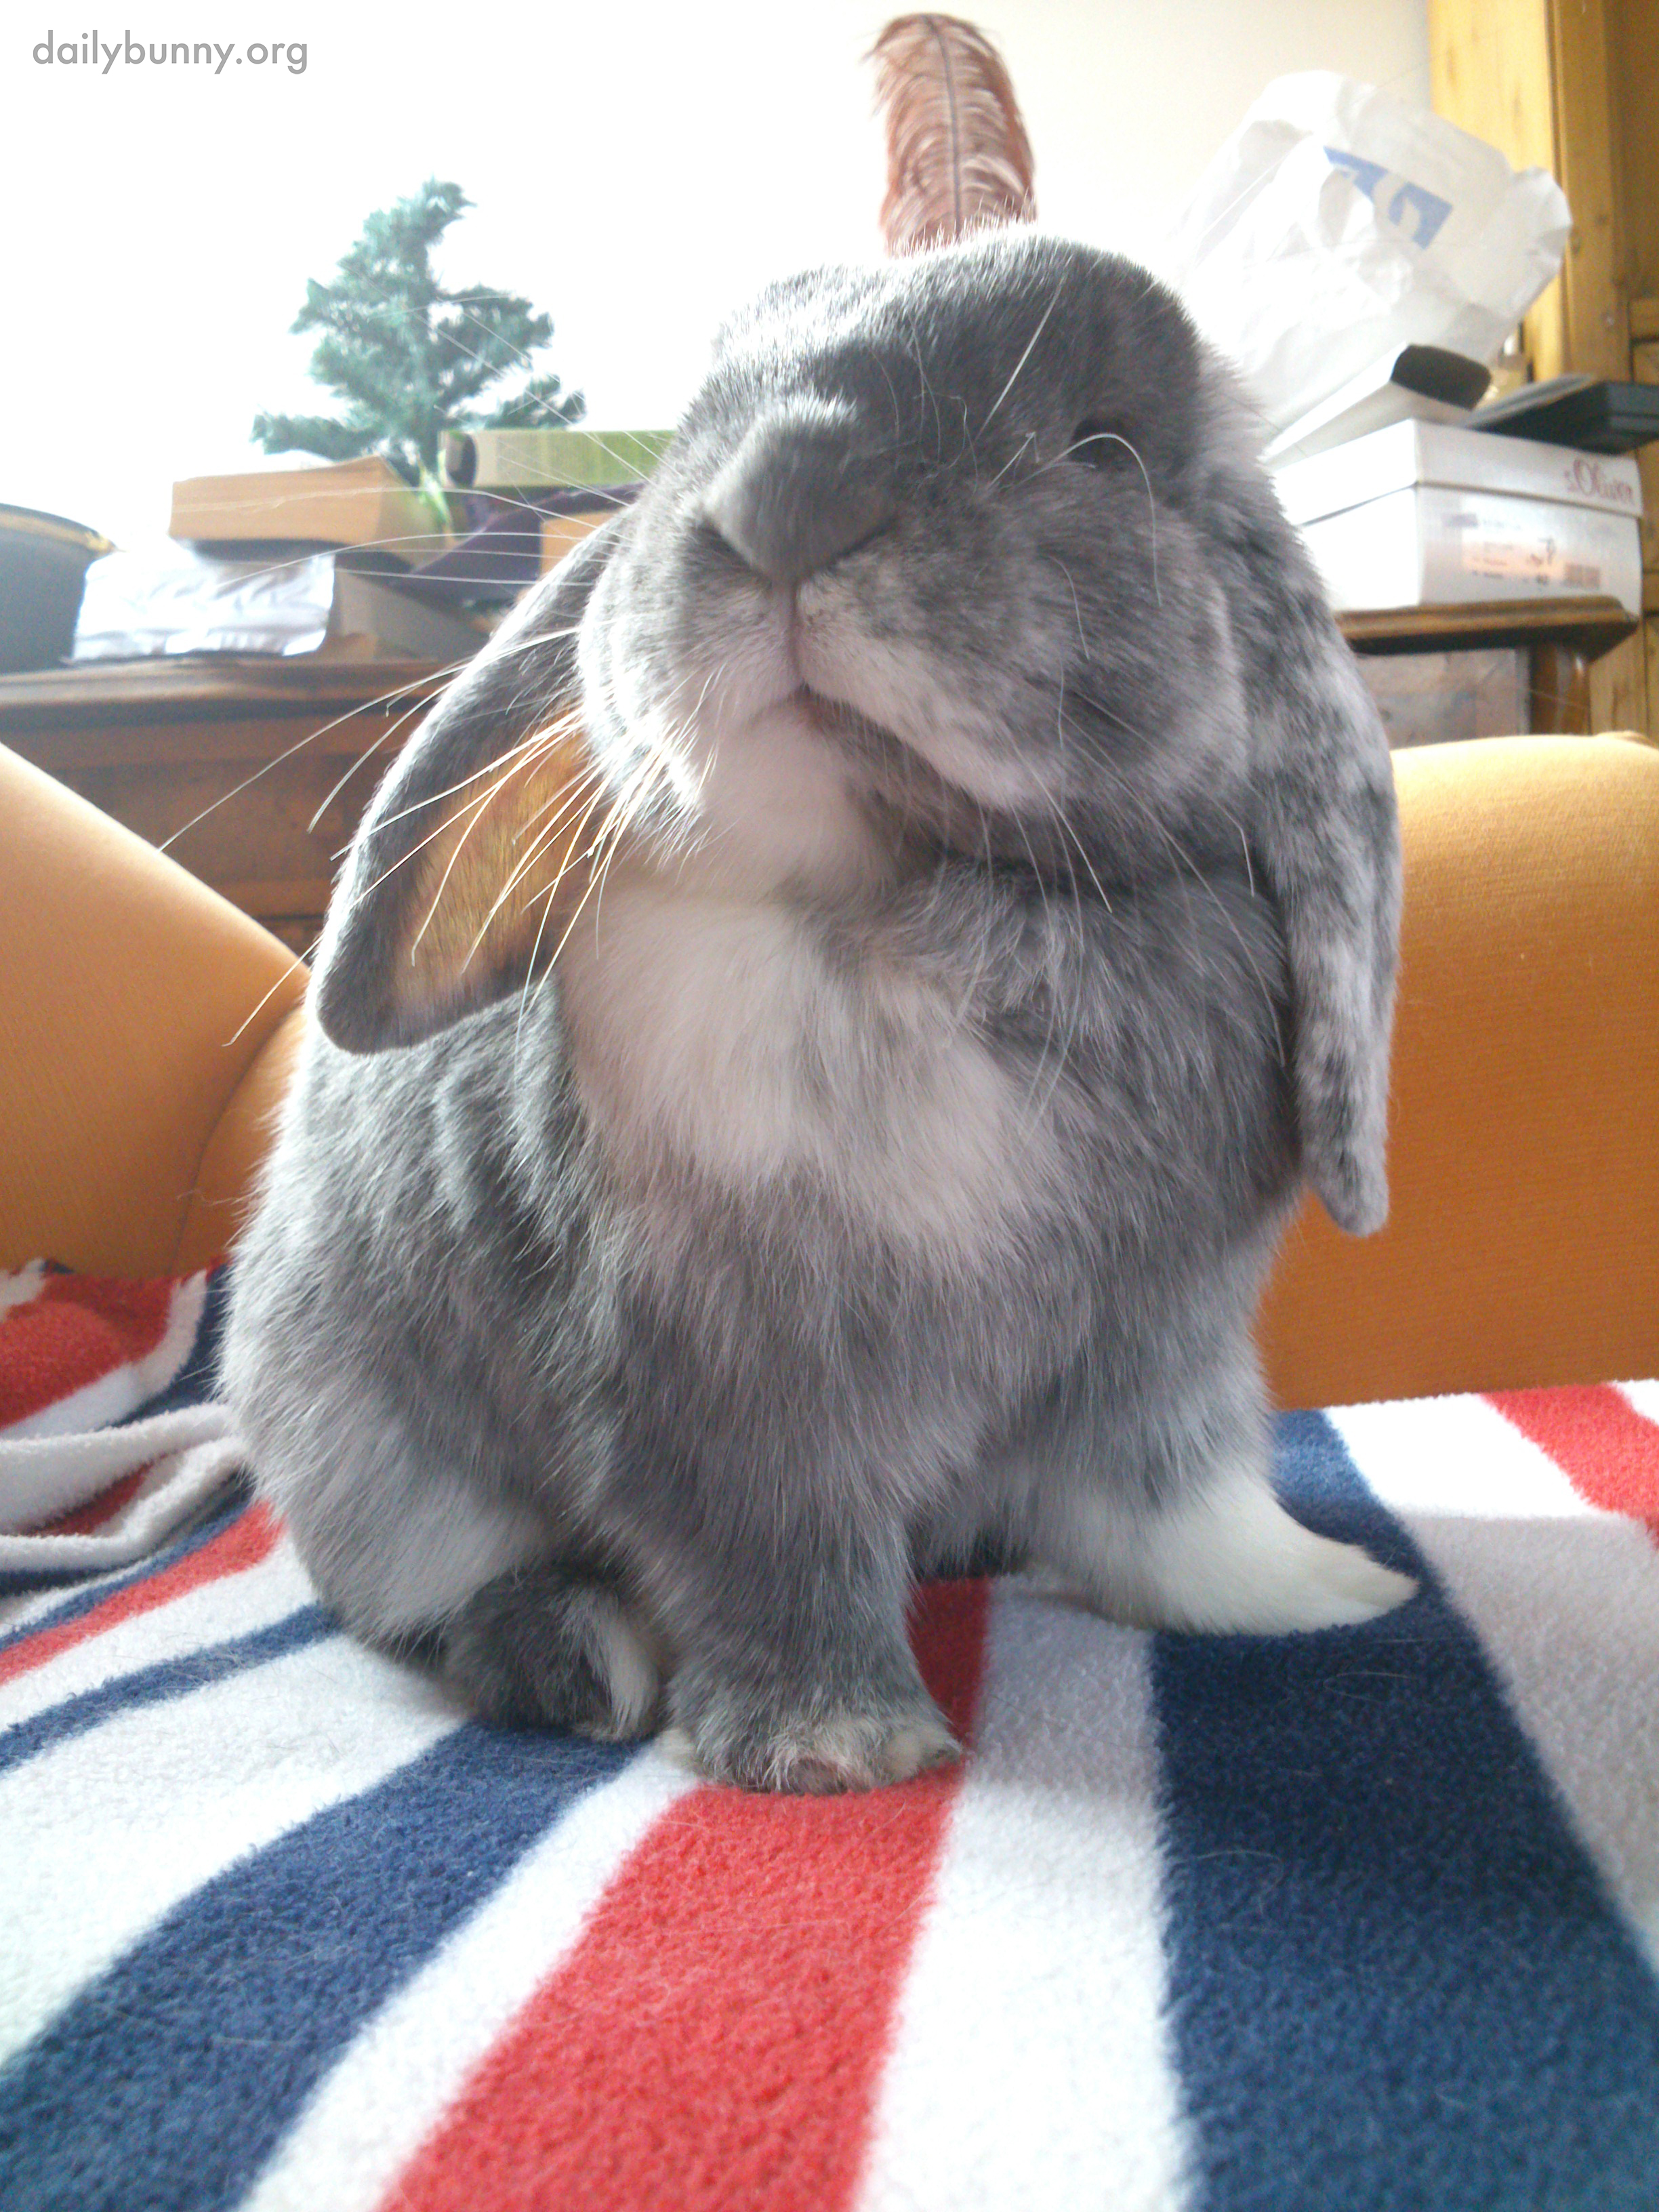 Bunny Can Look Distinguished and Inquisitive 1